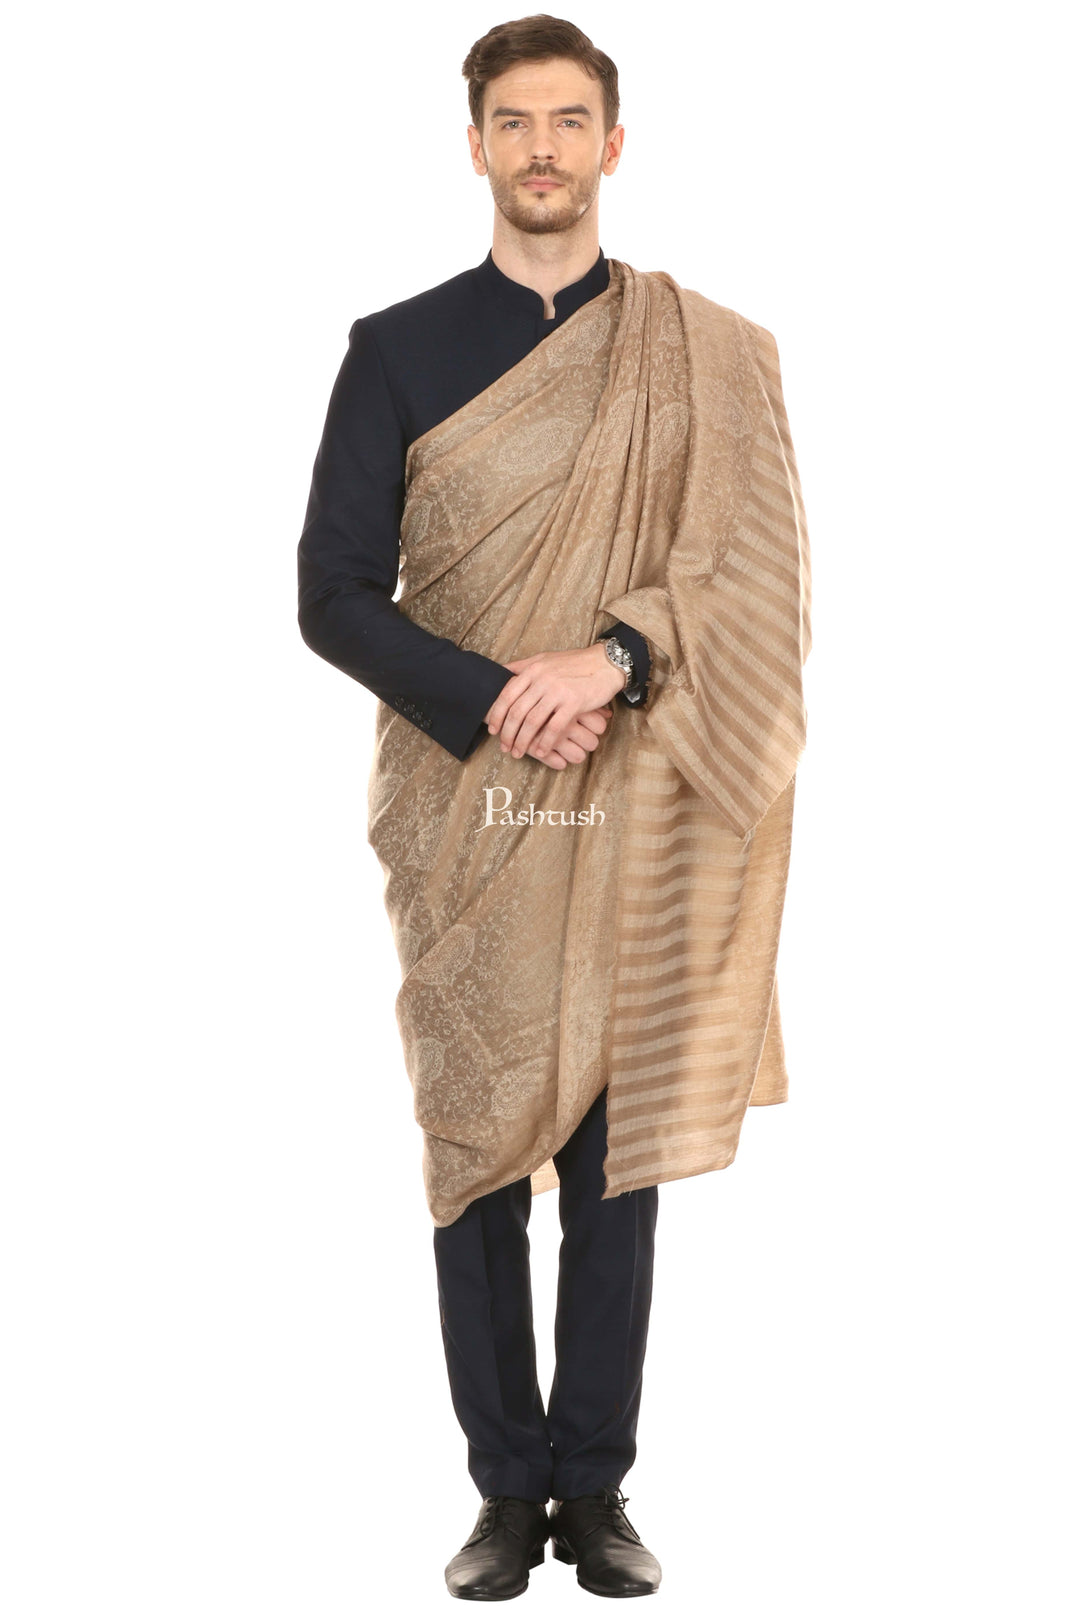 Pashtush India Gift Pack Pashtush His And Her Set Of Fine Wool Shawls With Premium Gift Box Packaging, Beige